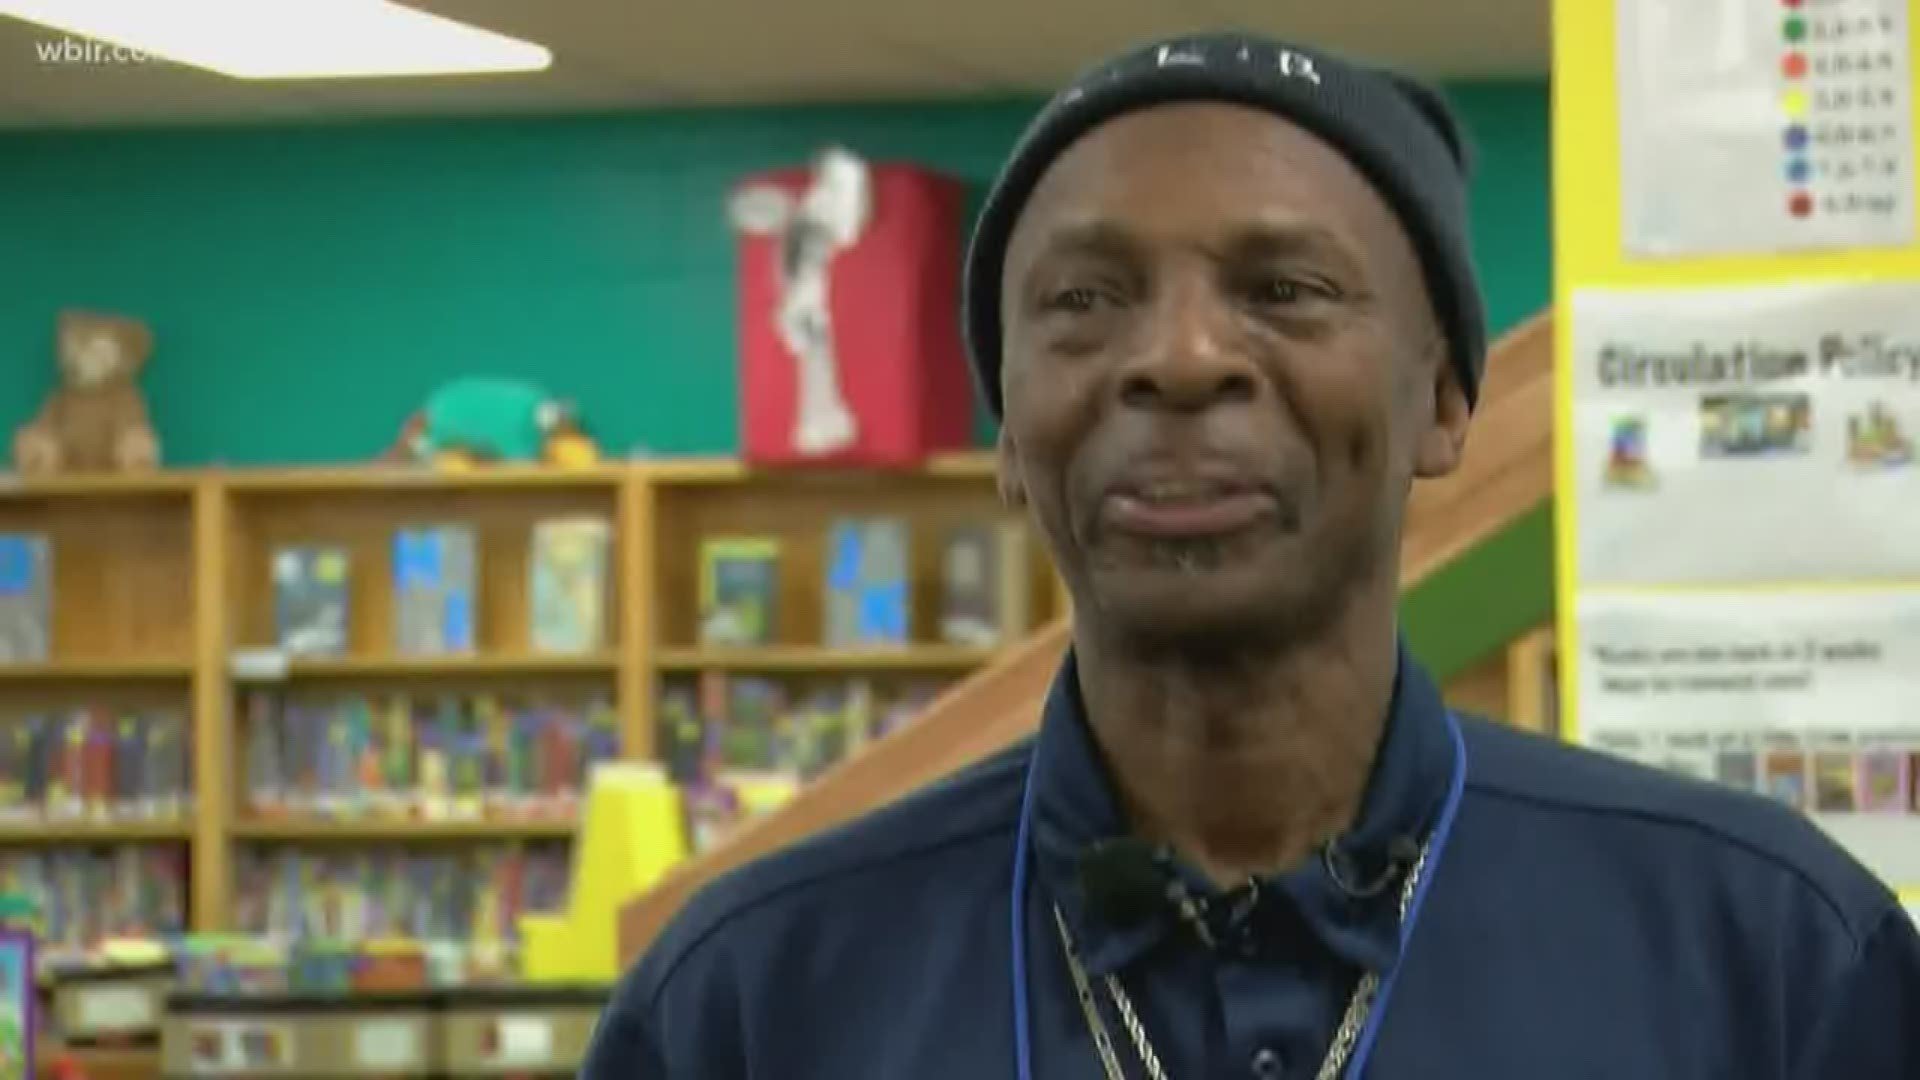 robert reed janitor breaks down when coworkers raise money for a car for him